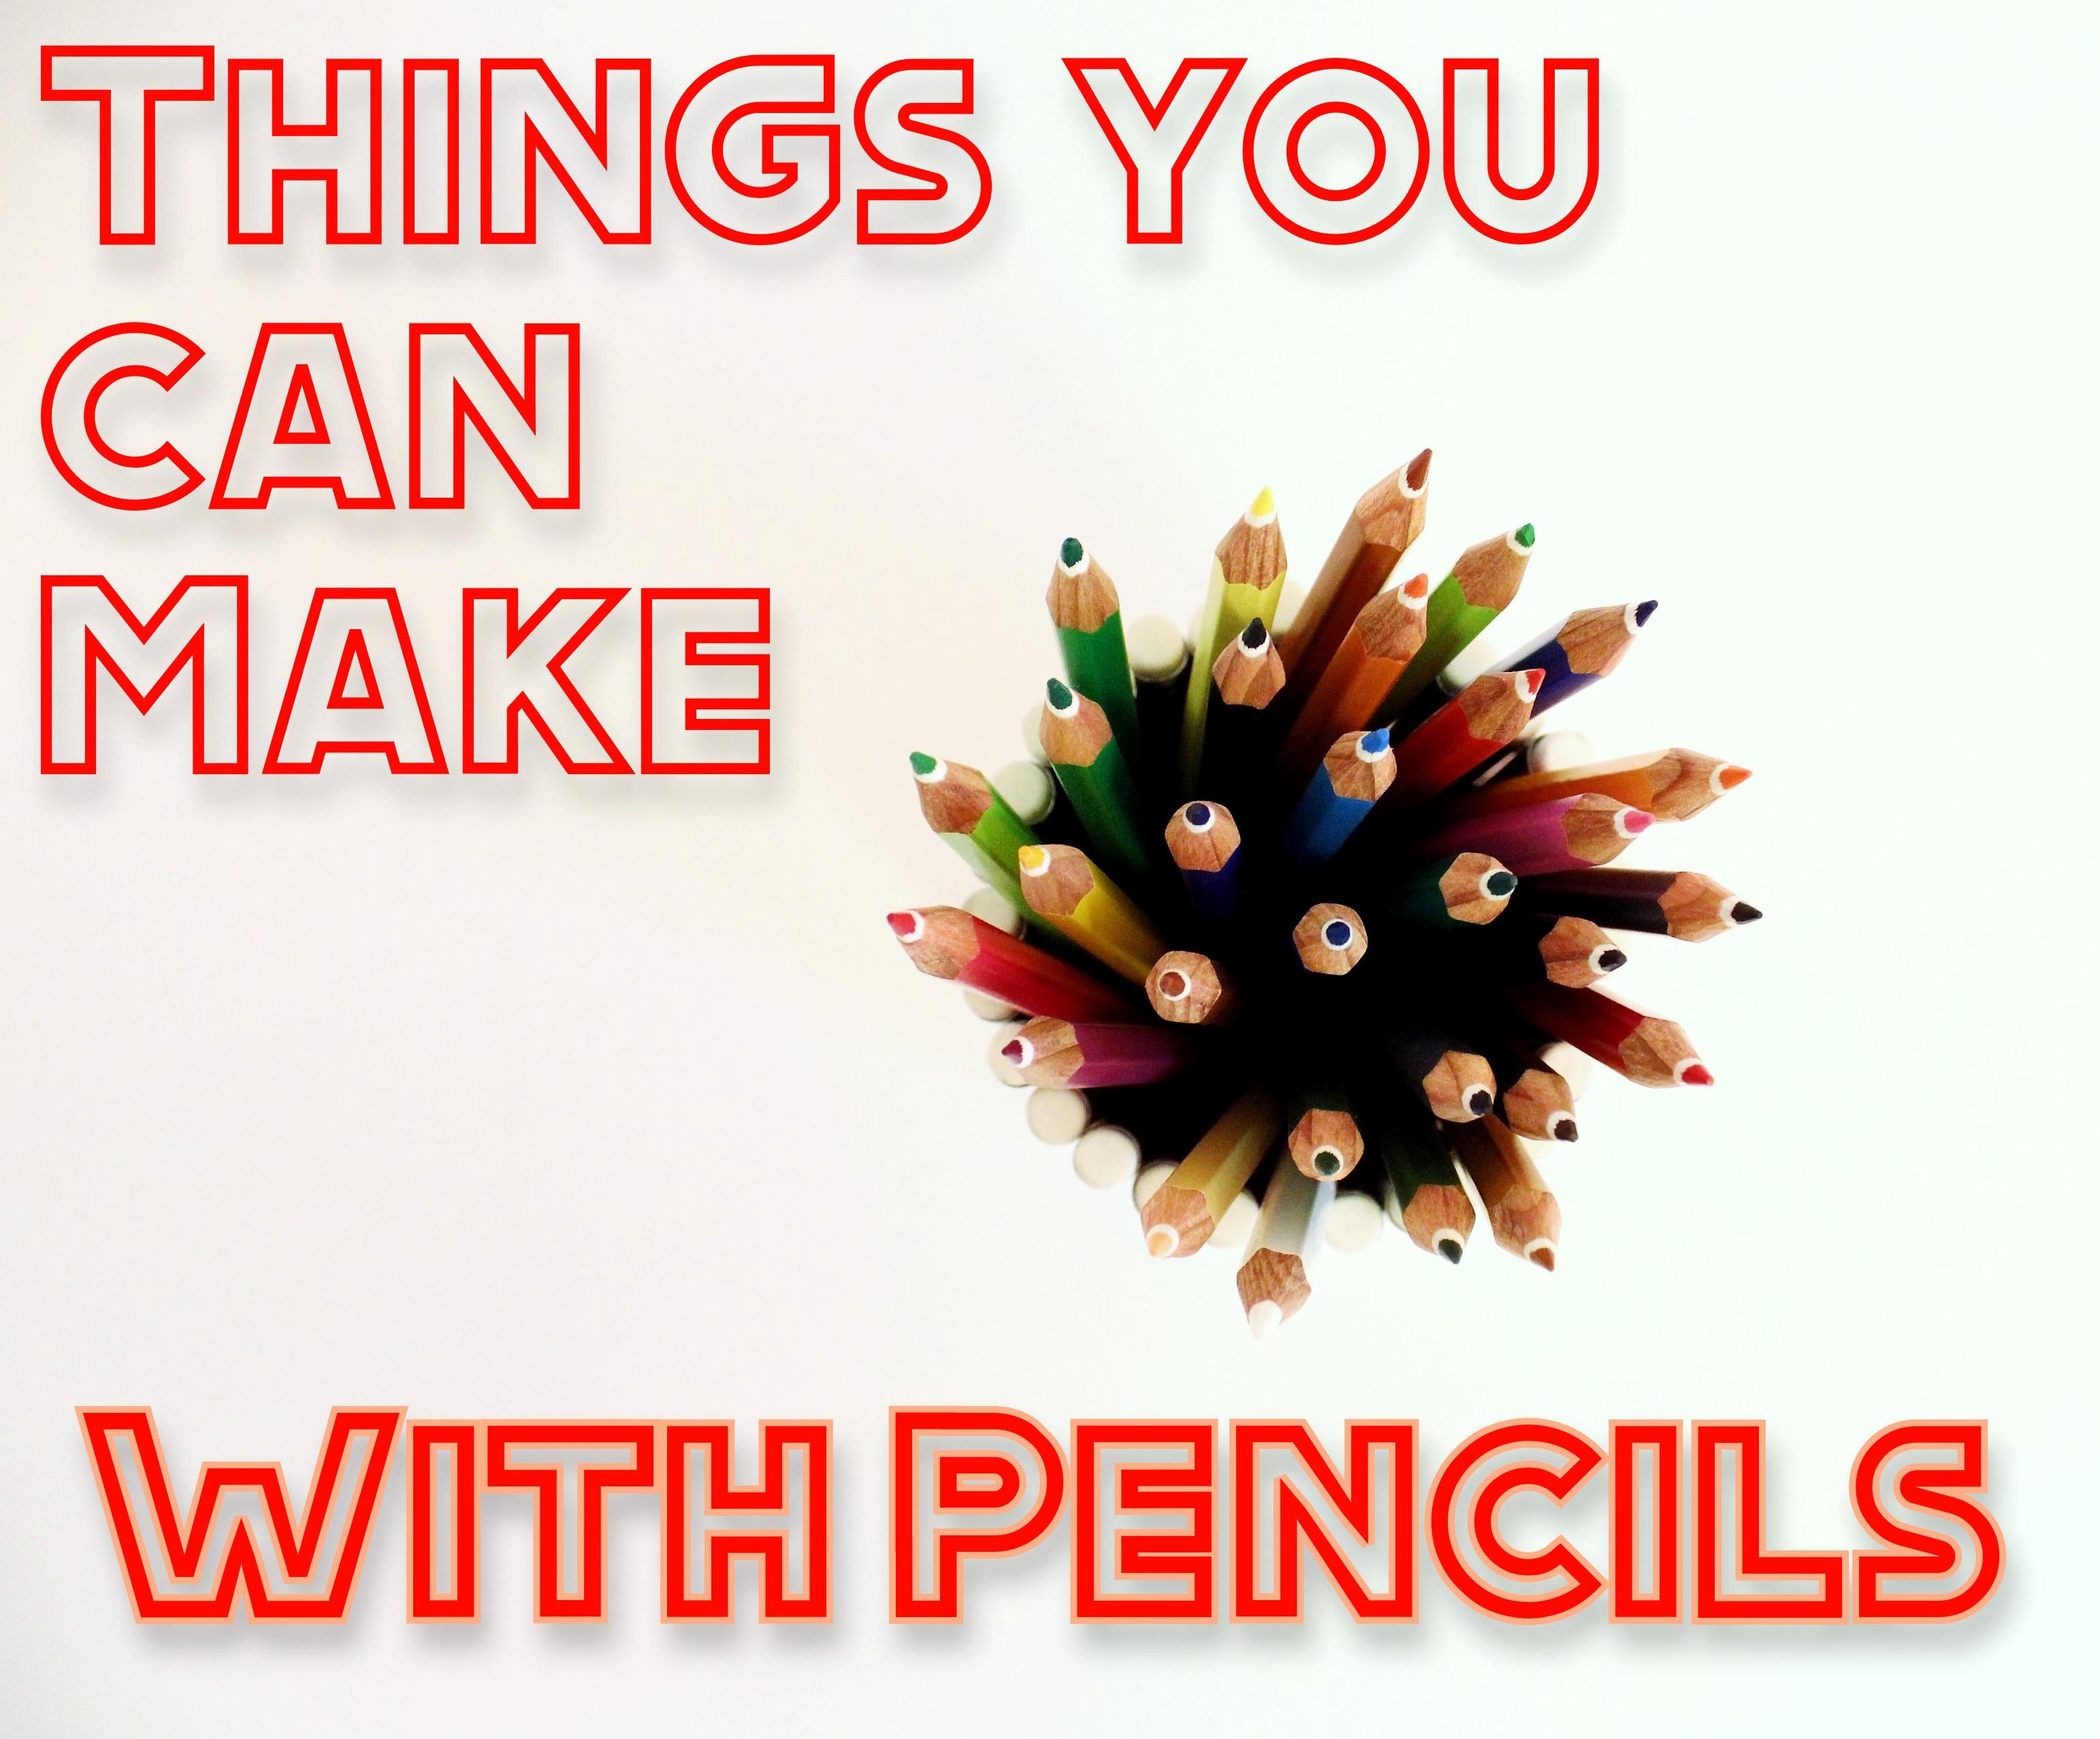 Unusual Things You Can Make With Pencils!